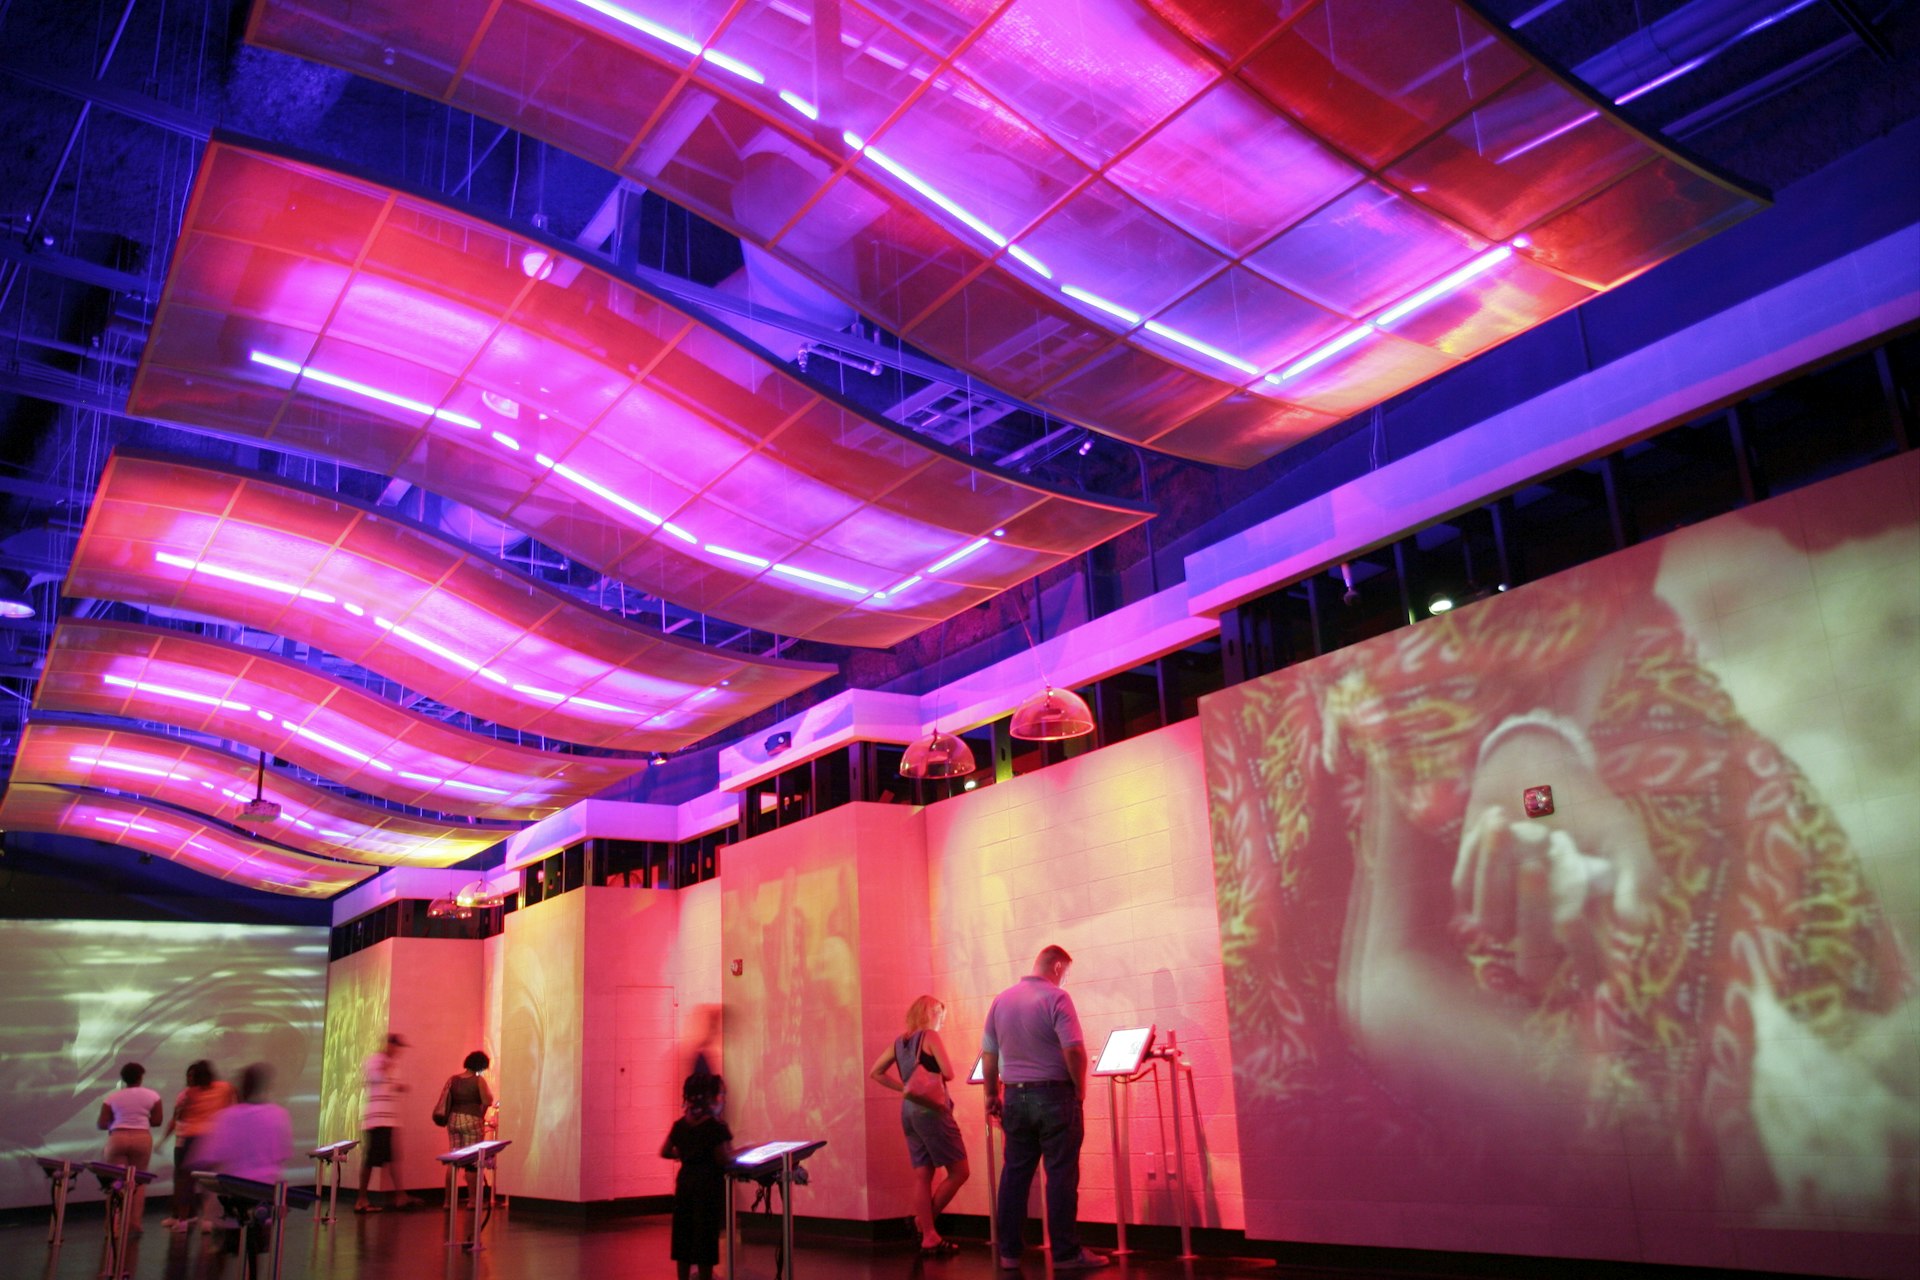 A multimedia exhibit at the National Underground Railroad Freedom Center